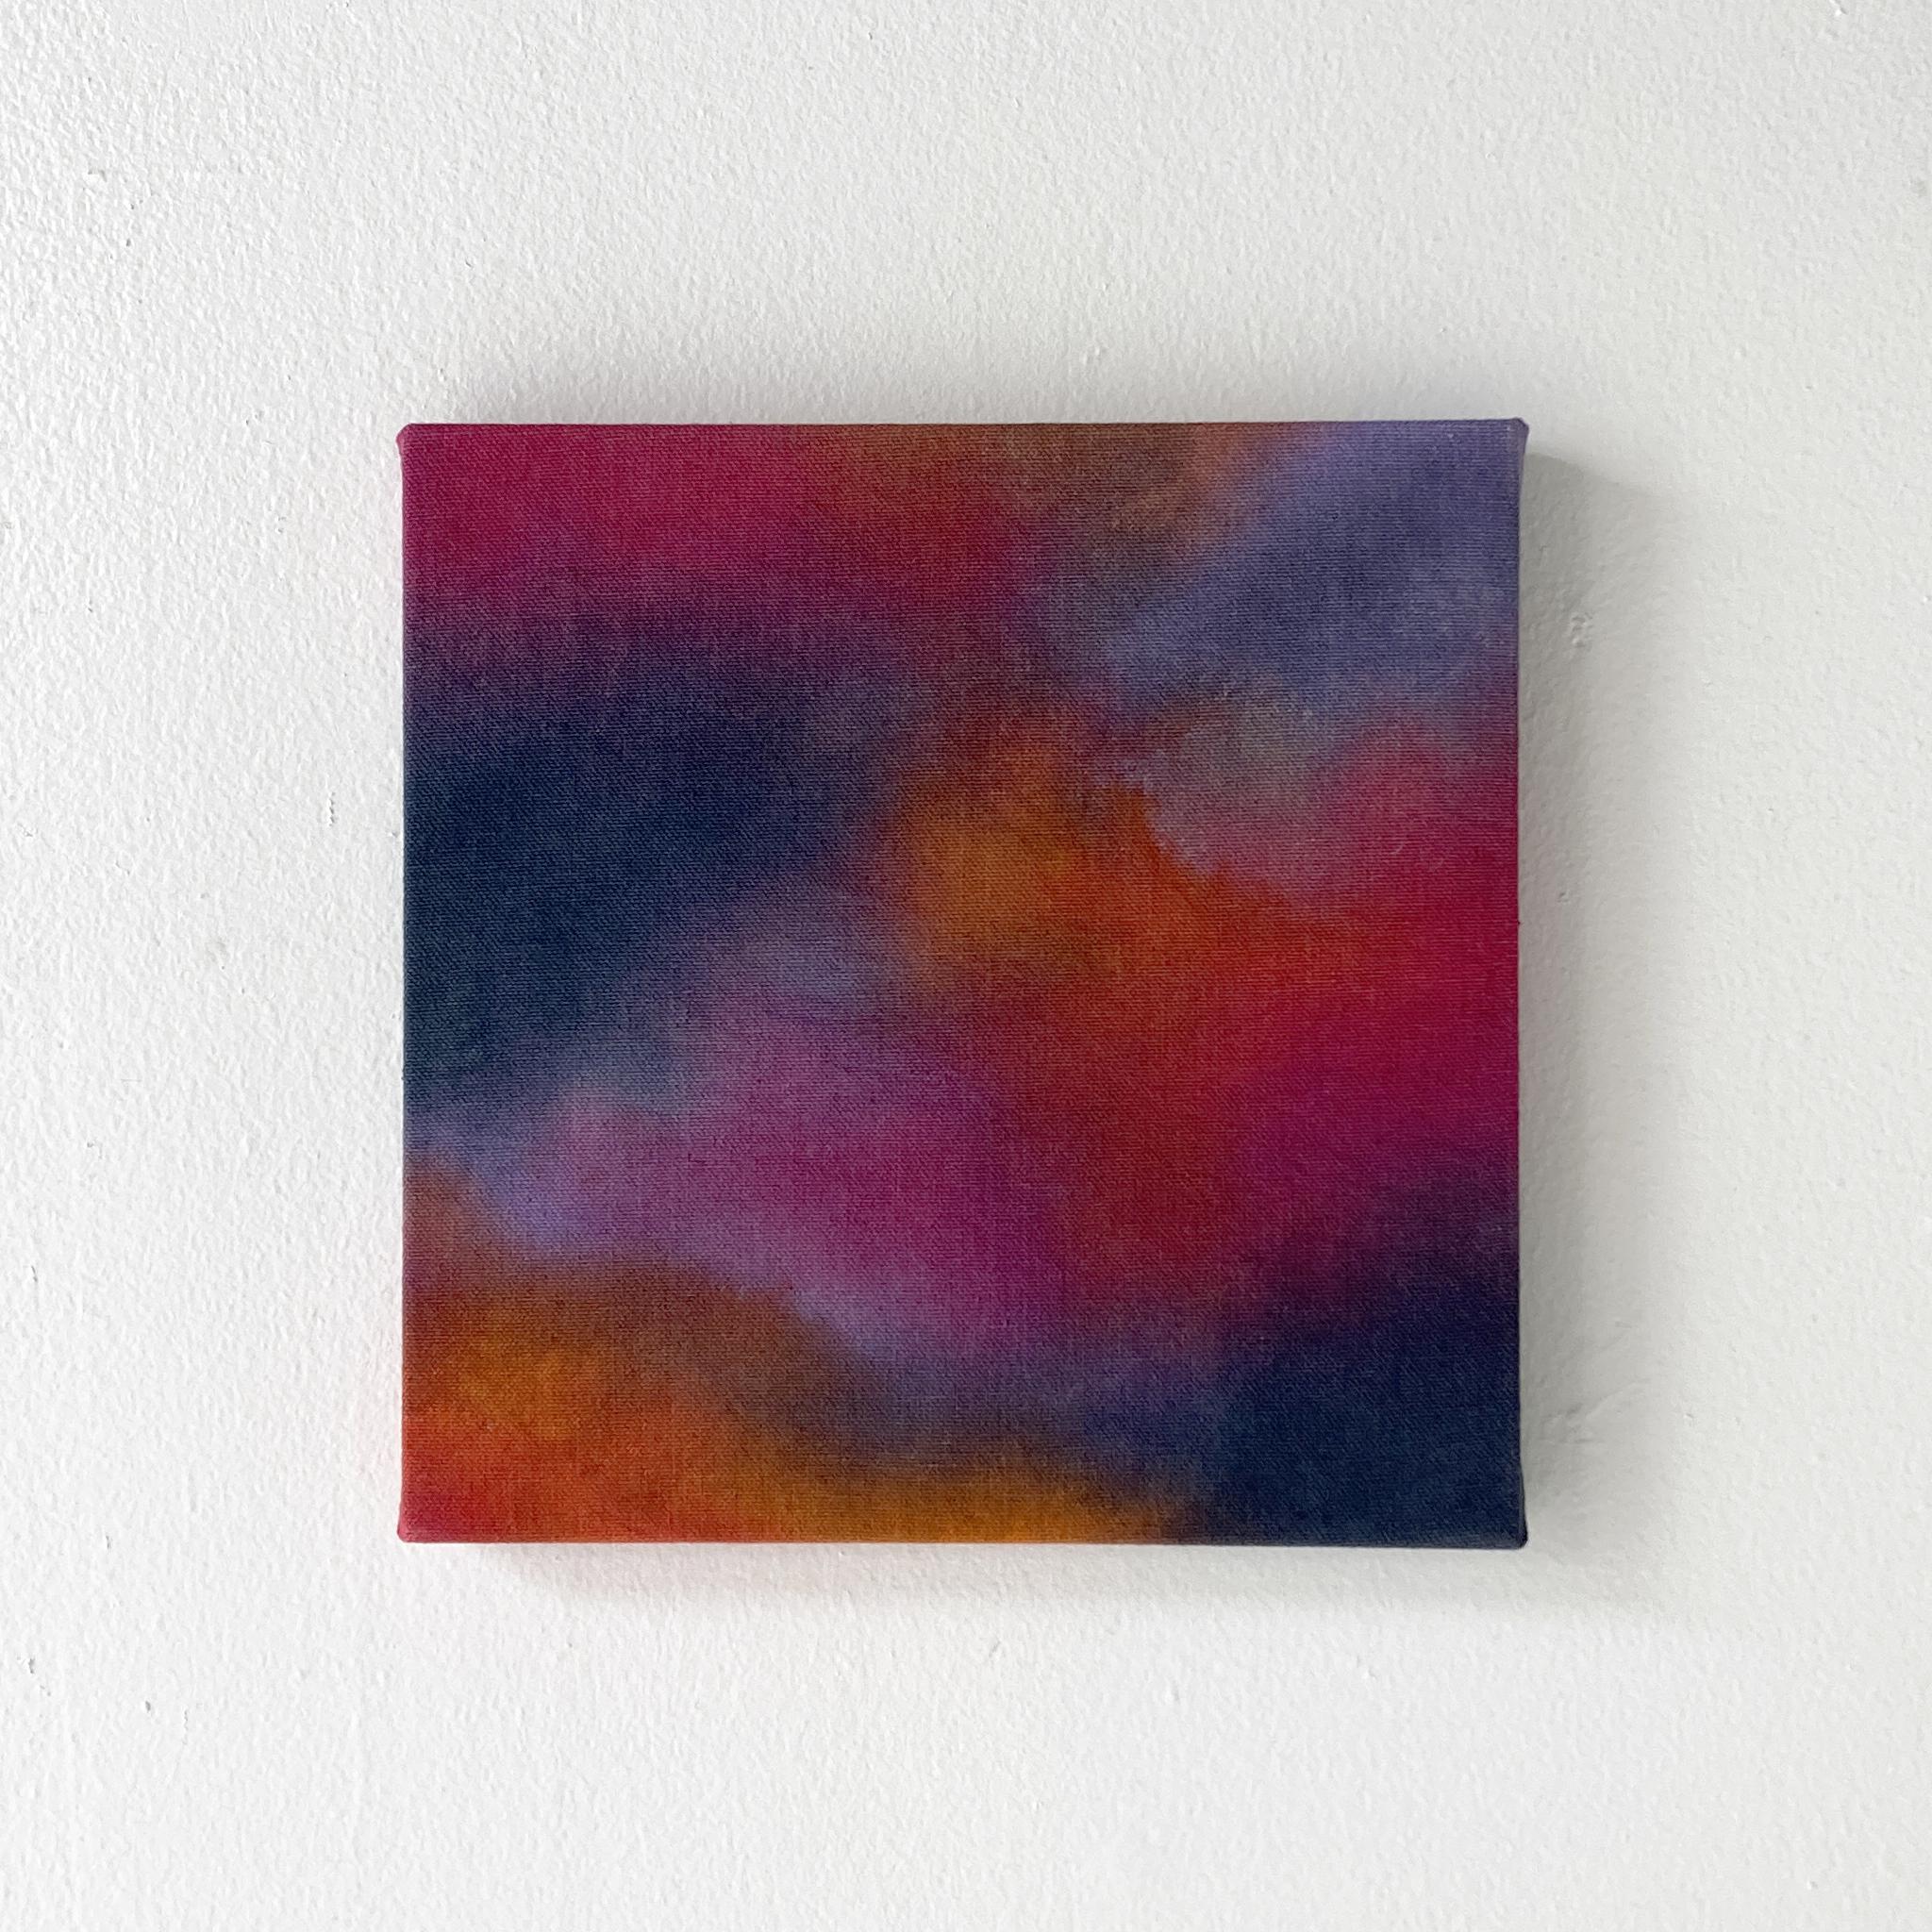 An ethereal abstract painting, created in our NYC studio. This 10 x 10 inch canvas is a place for the eye to wander. Magenta, persimmon, navy and lilac create a calming yet vibrant piece.

This series of paintings is an extension of my exploration